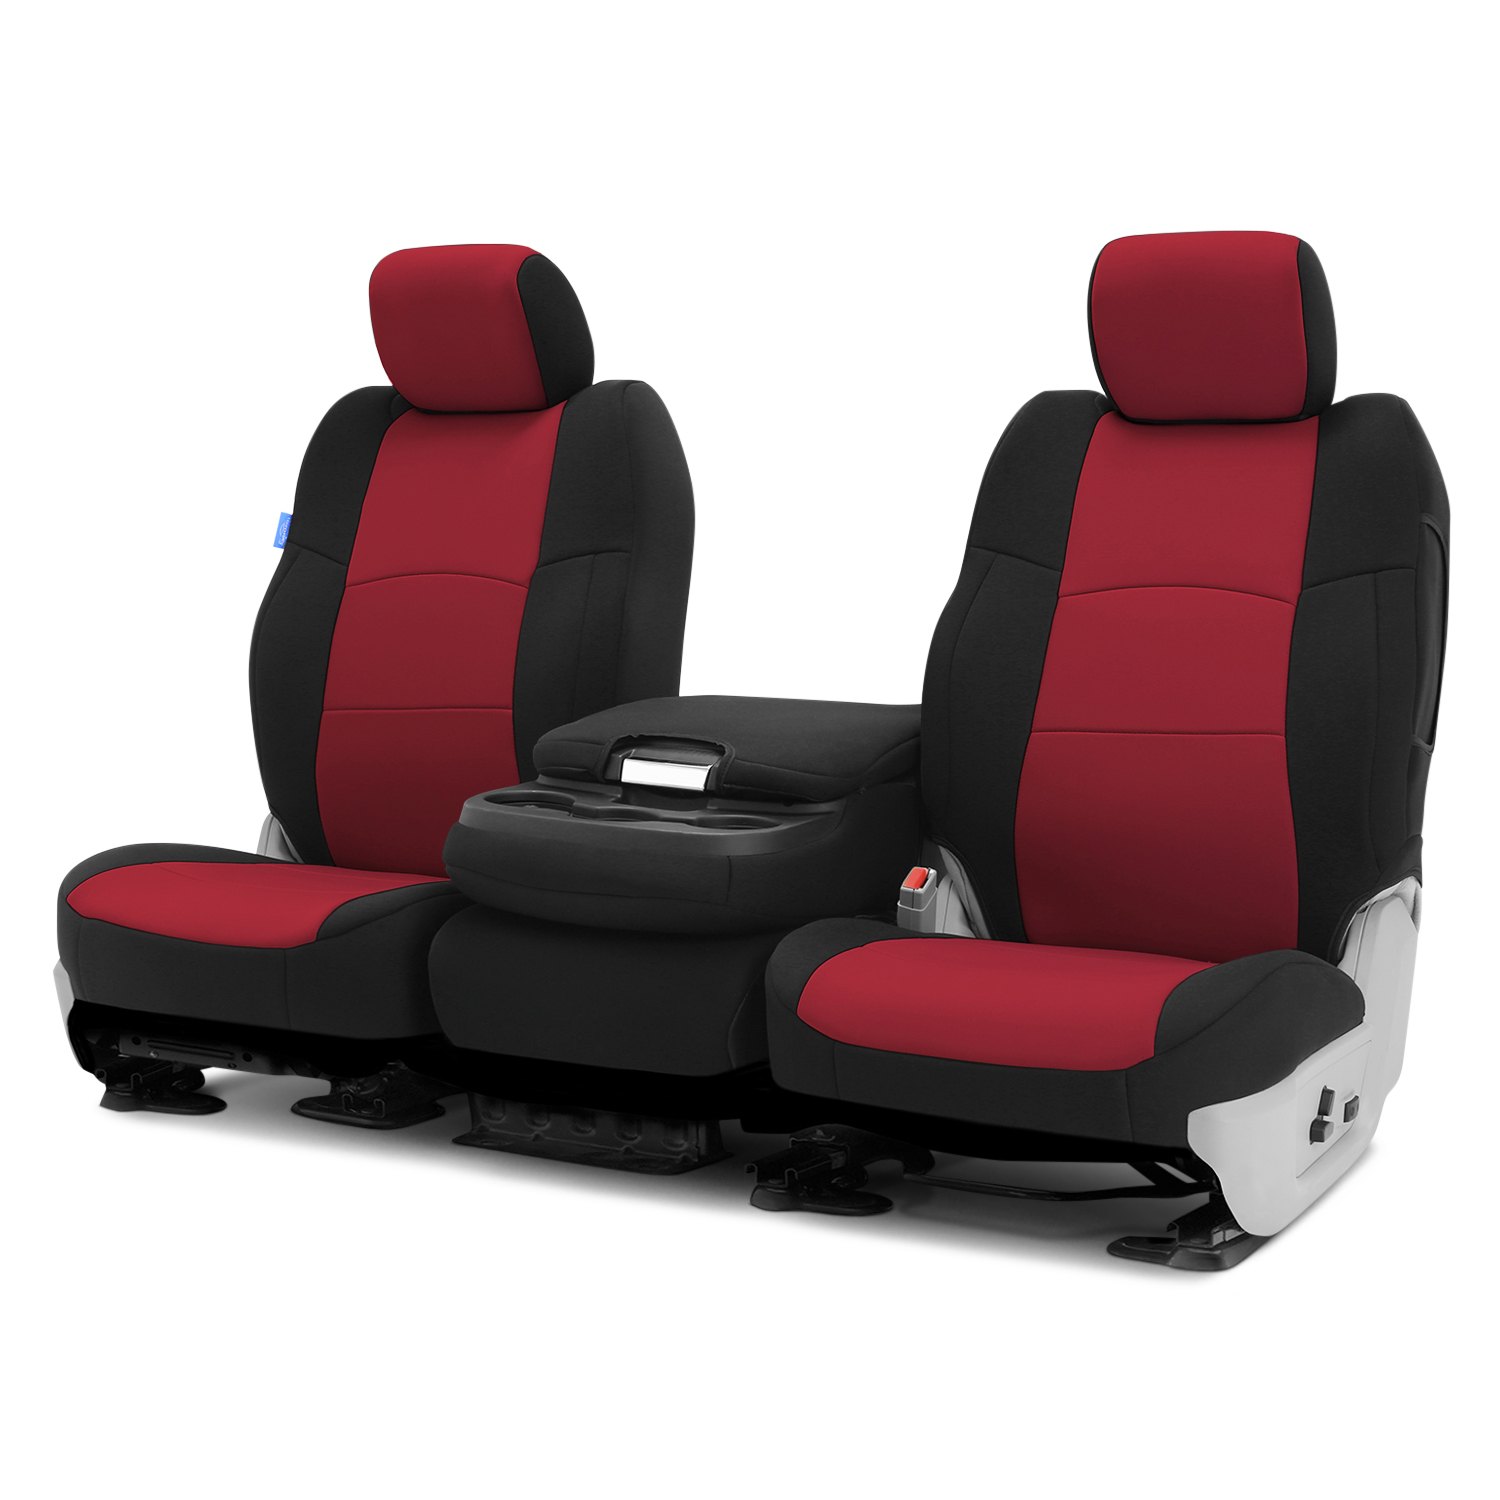 Chevrolet Silverado Tailored Front & Rear Neosupreme Seat Covers from Coverking 